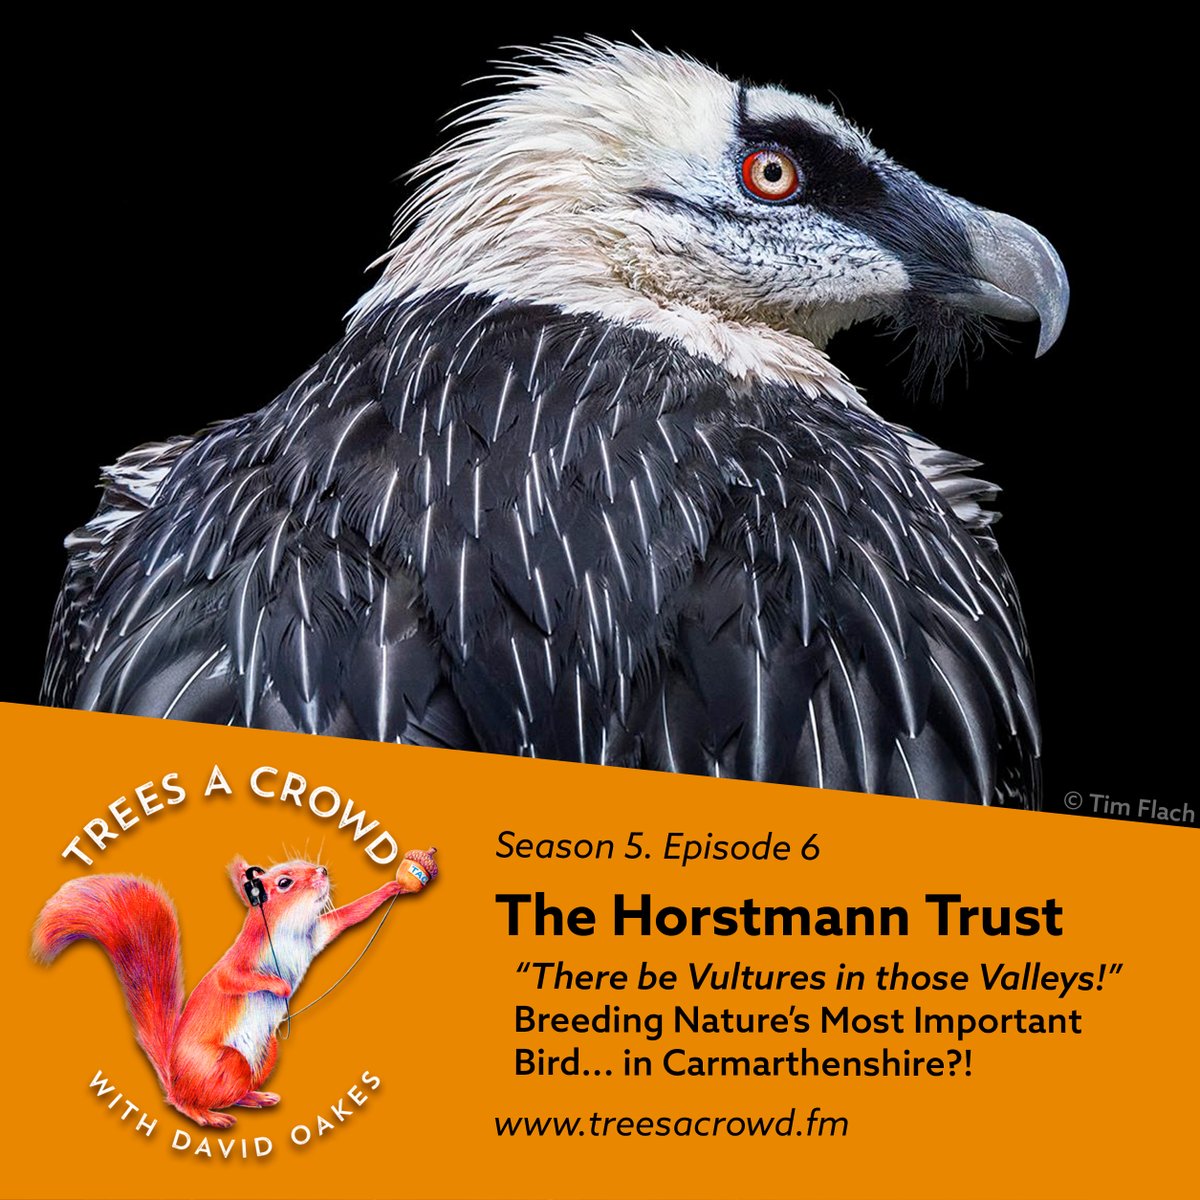 NEW EPISODE OUT NOW! 🥚 The @HorstmannTrust: Vultures in the Valleys 🪺 David heads to Carmarthenshire to meet Adam, Holly and c.70 vultures that call the Welsh Valleys their home! 🥩 podcasts.apple.com/gb/podcast/tre…